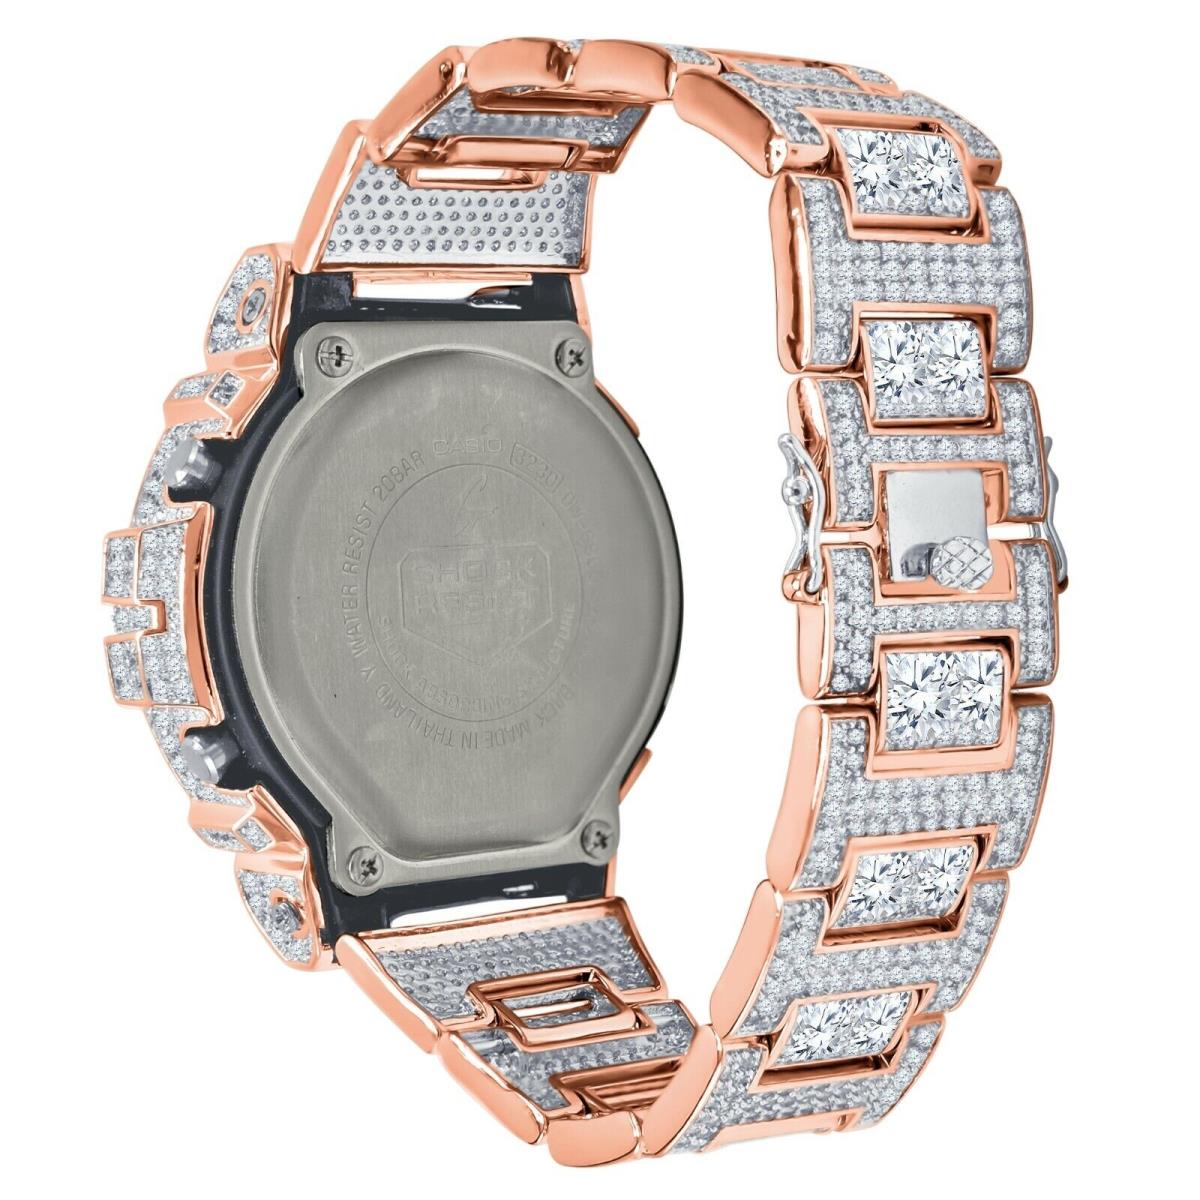 Casio jewelry  - Gold , Rose Gold Dial, Rose Gold, White Band